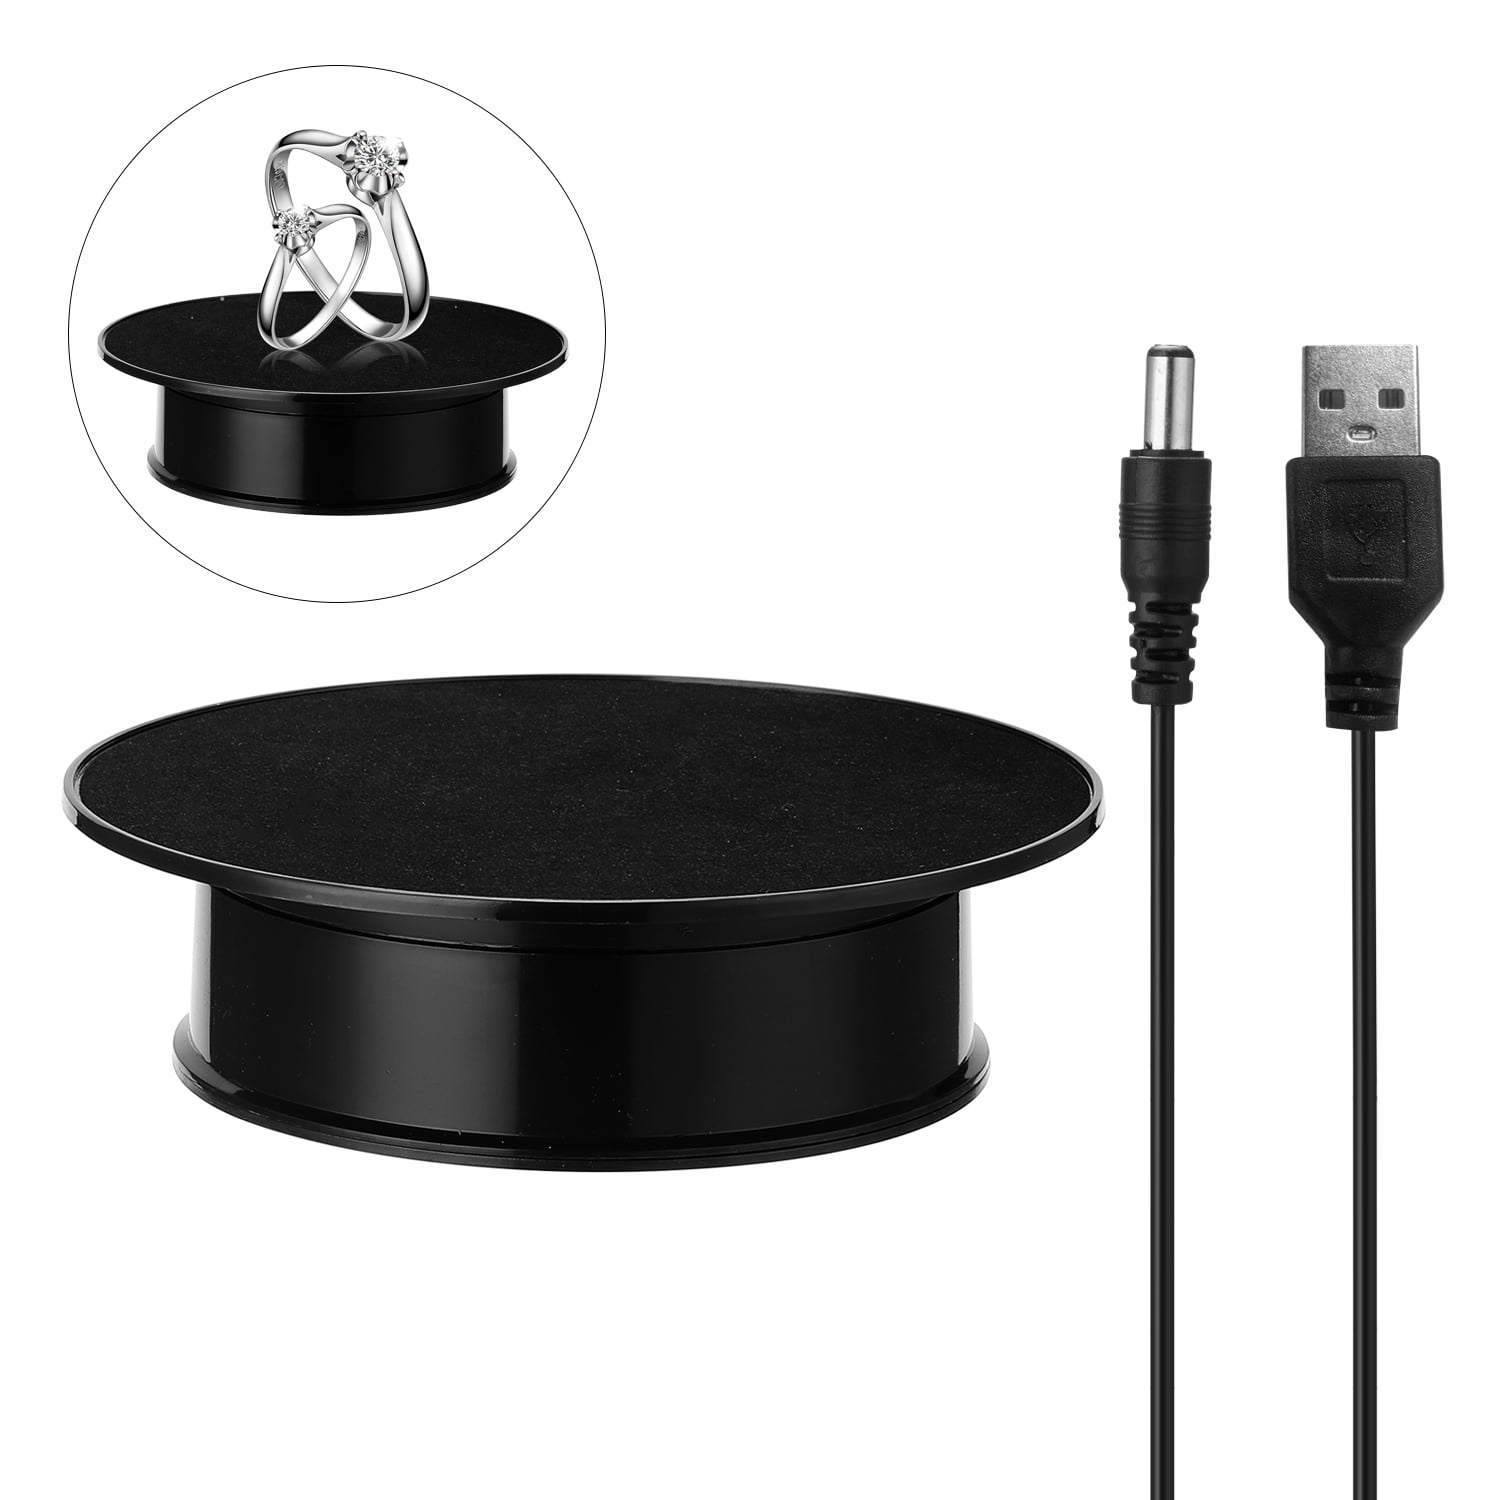 360 Degree Electric Rotating Turntable Display Stand For Photography/Video Black 